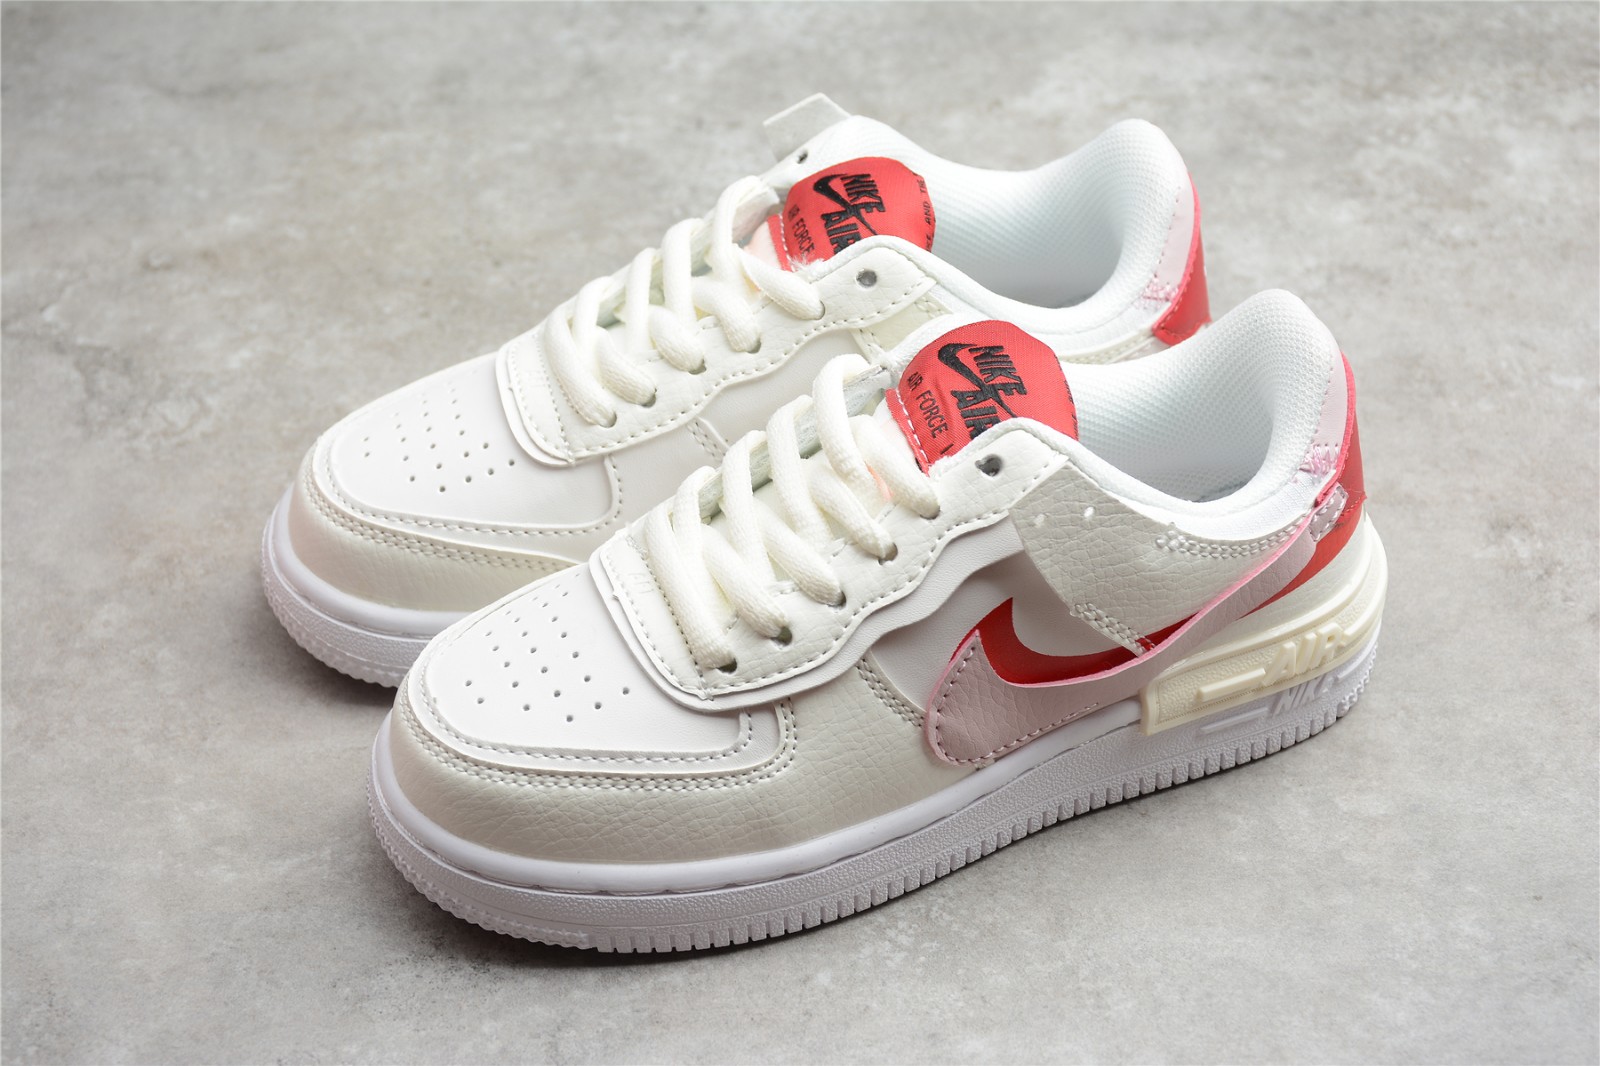 Maken Perioperatieve periode Consulaat 106 for Kid - Nike slippers Air Force 1 Shadow SE Beige Pink Red AQ4211 -  GmarShops - nike air retro 5 v battery price philippines